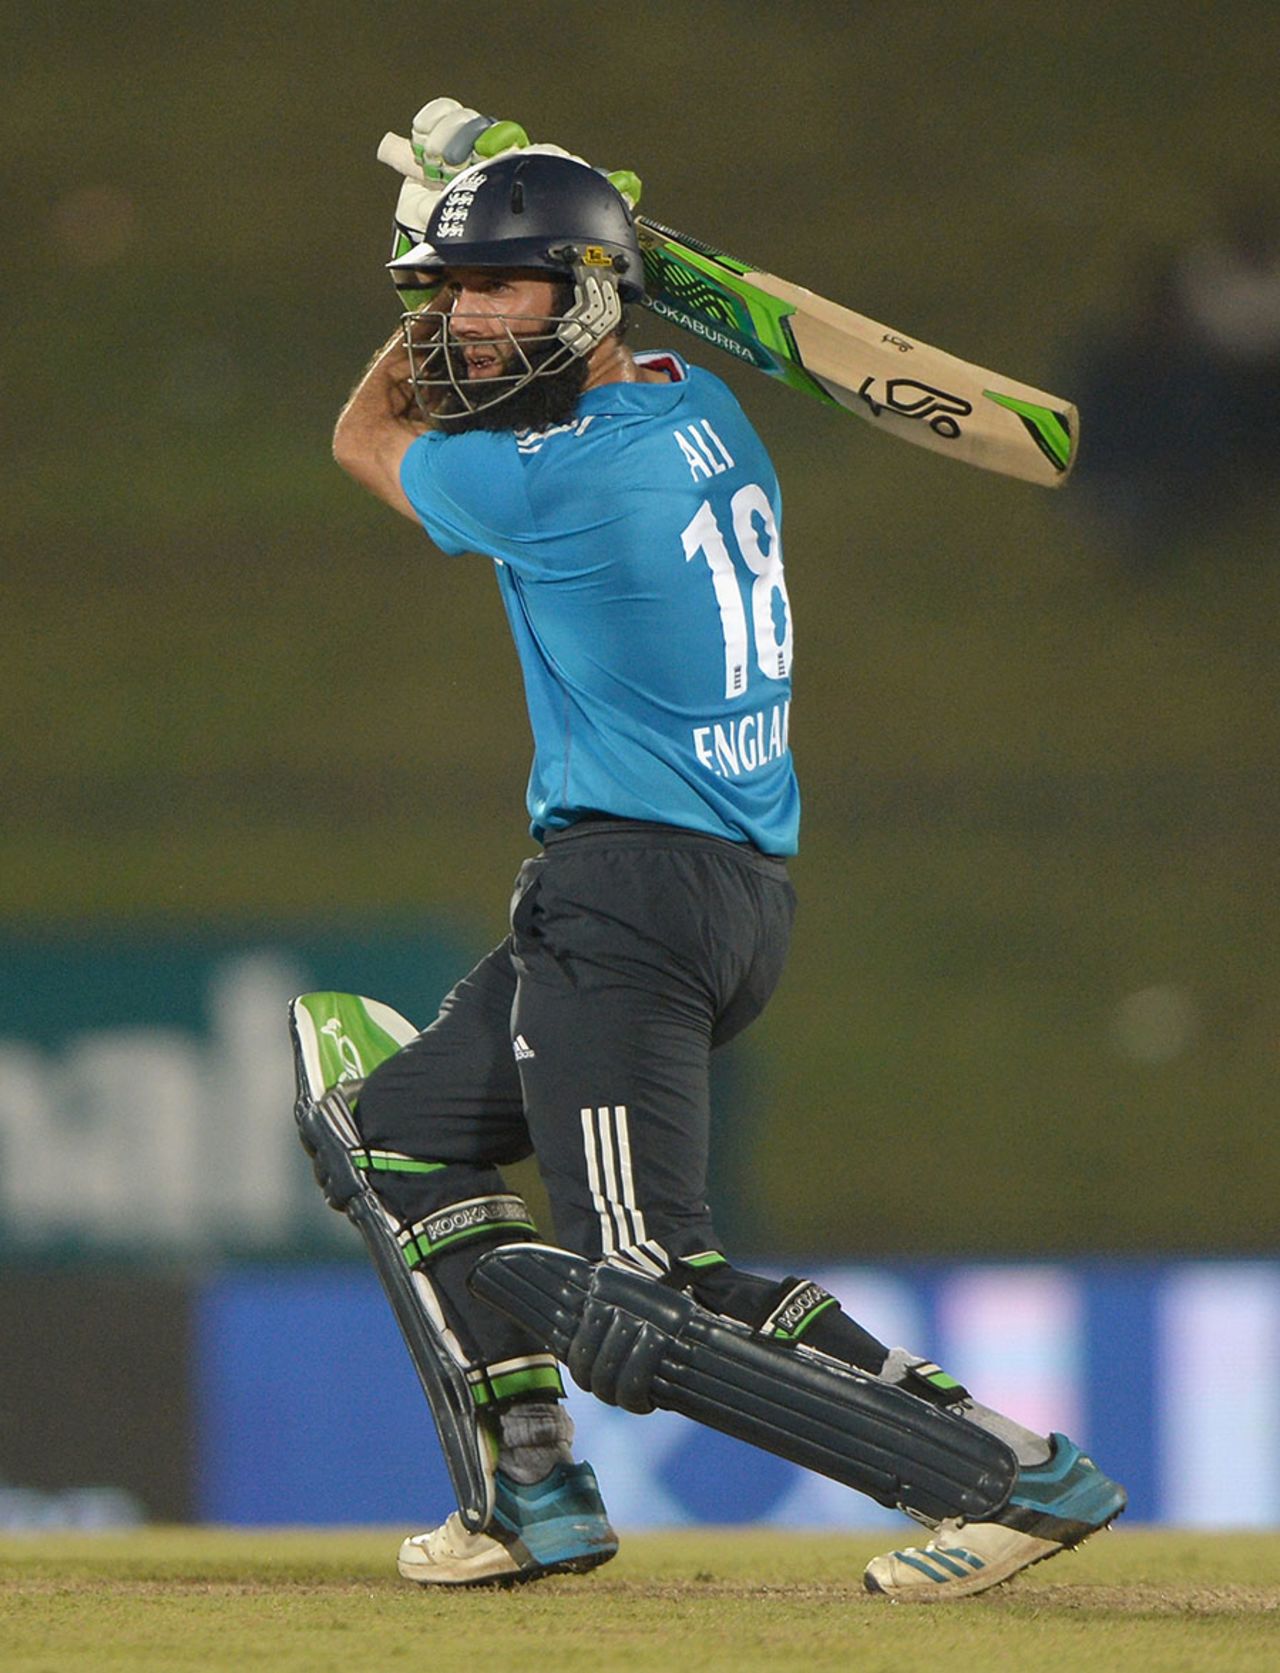 Moeen Ali past fifty for the second time in the series from only 29 balls, Sri Lanka v England, 3rd ODI, Hambantota, December 3, 2014